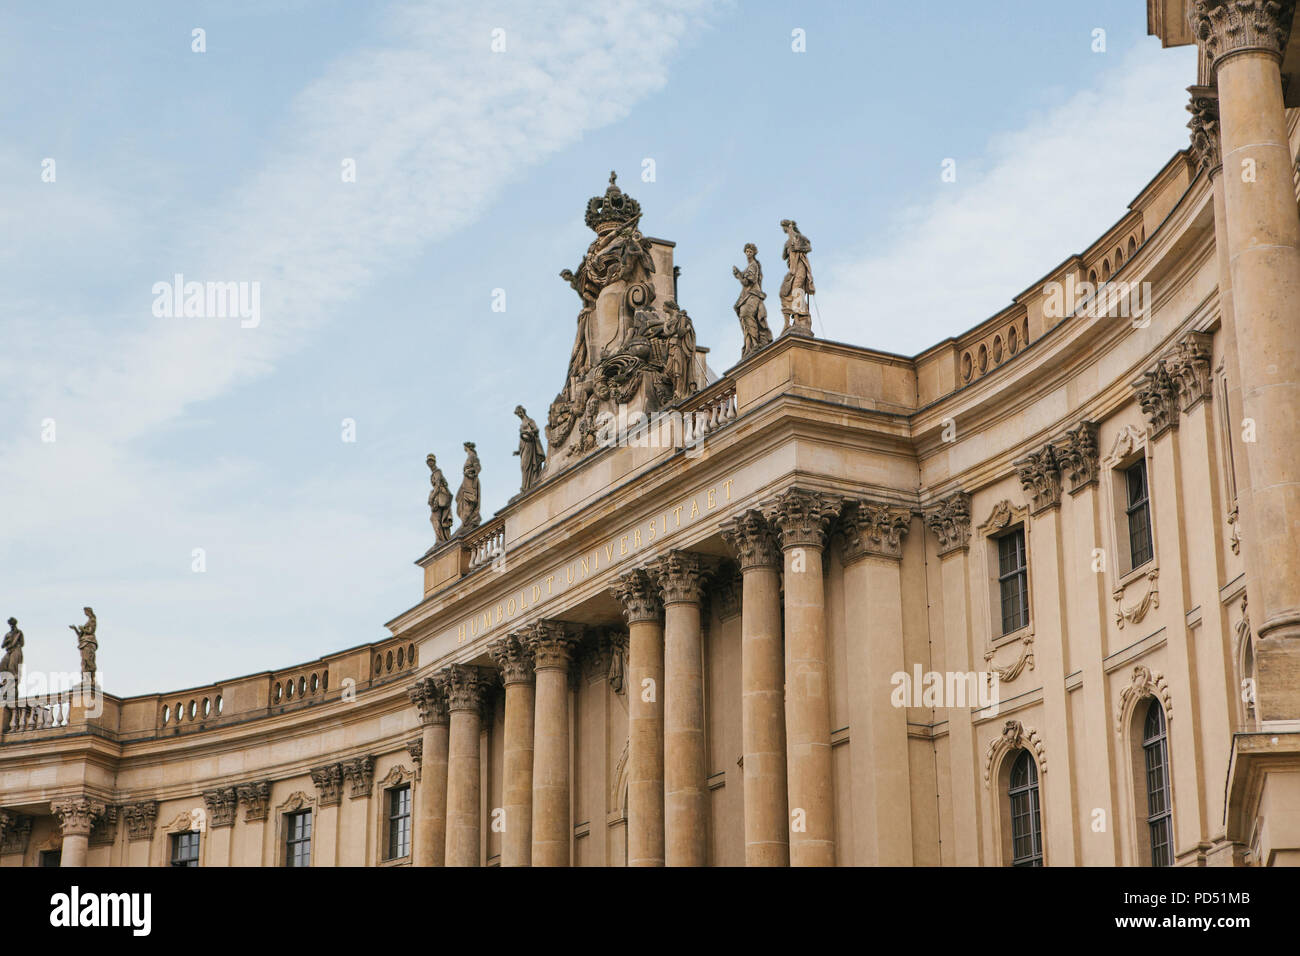 Humboldt University against a blue sky on a summer day. Berlin, Germany. Stock Photo